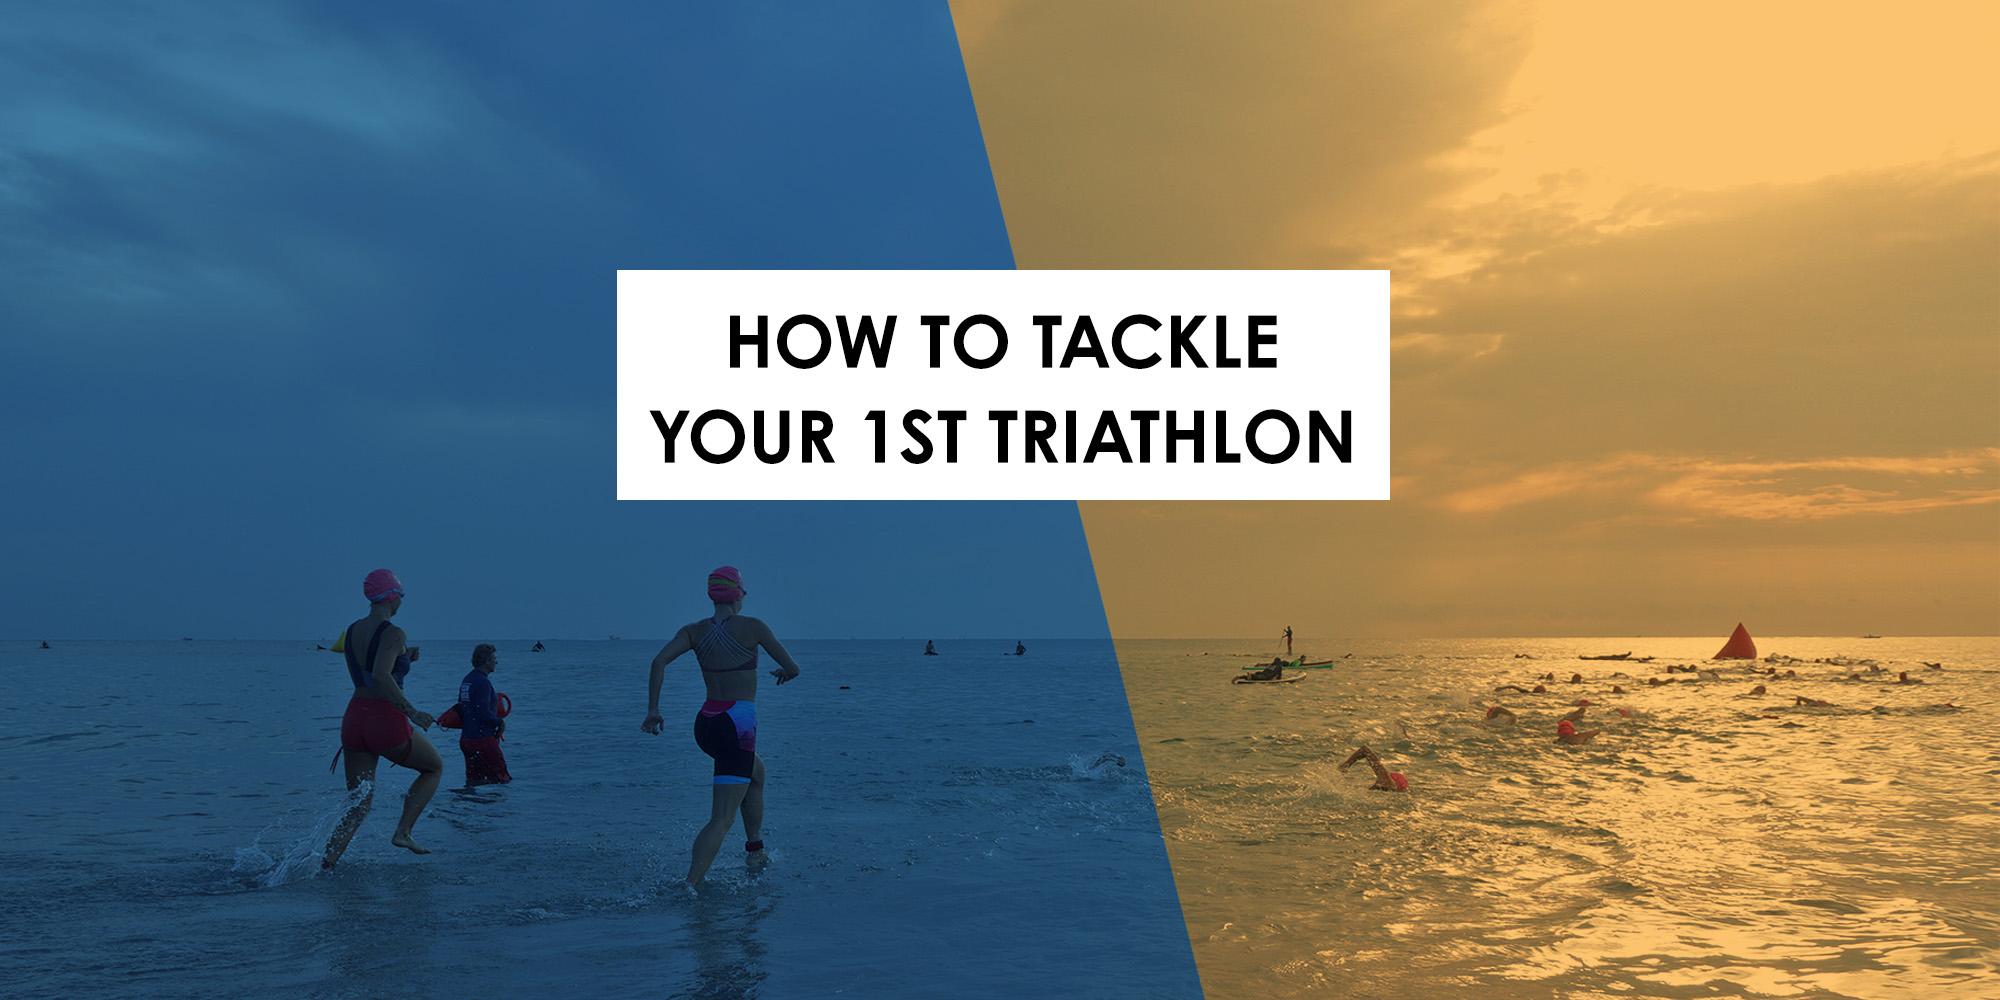 How to Tackle and Conquer your first triathlon